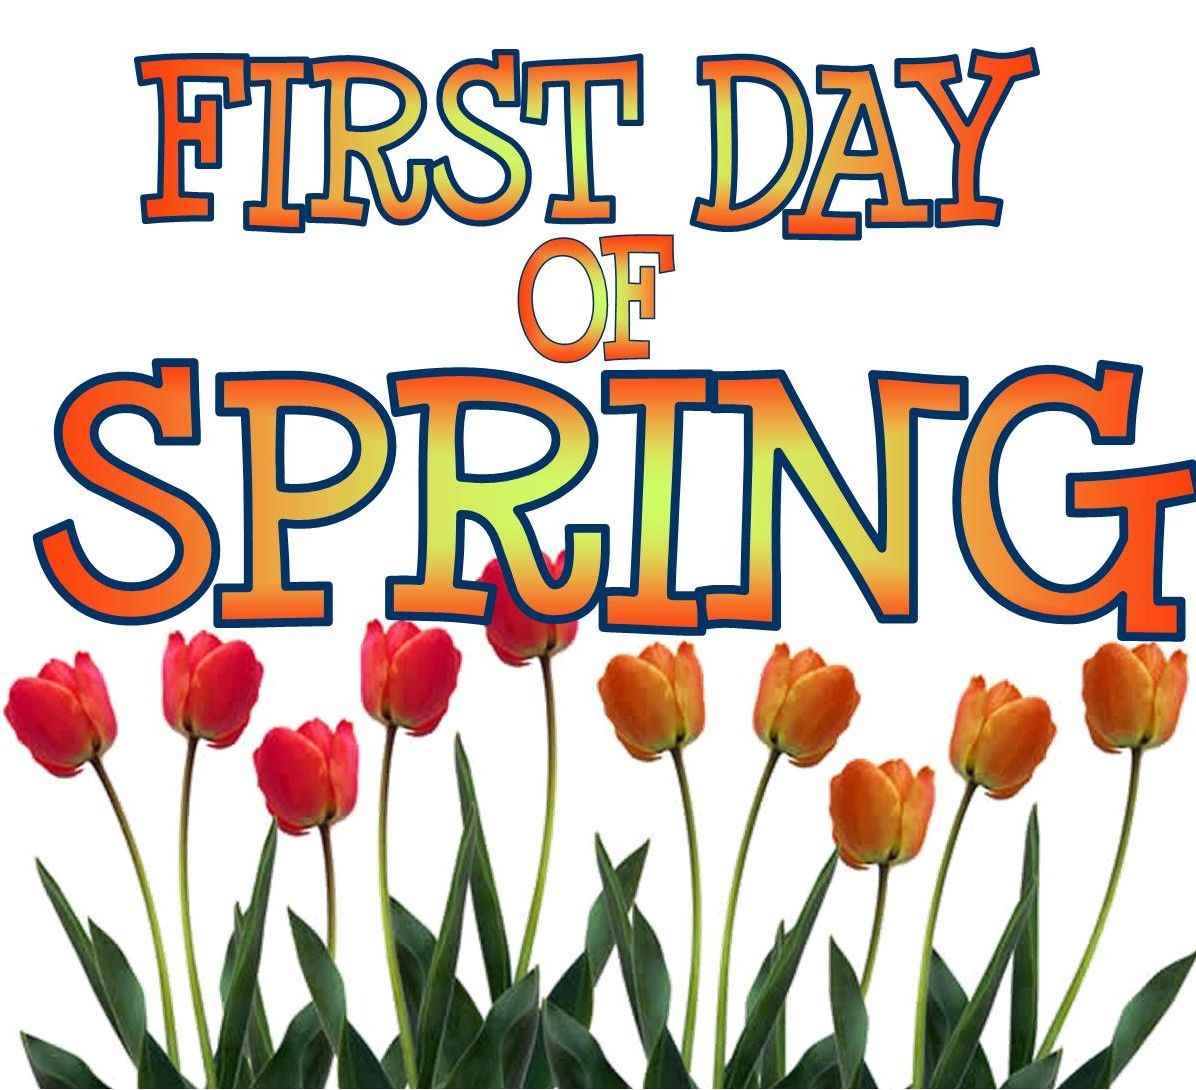 March please. First Day of Spring. Happy first Day of Spring. First Day of Spring картинки. 1 March first Spring Day.